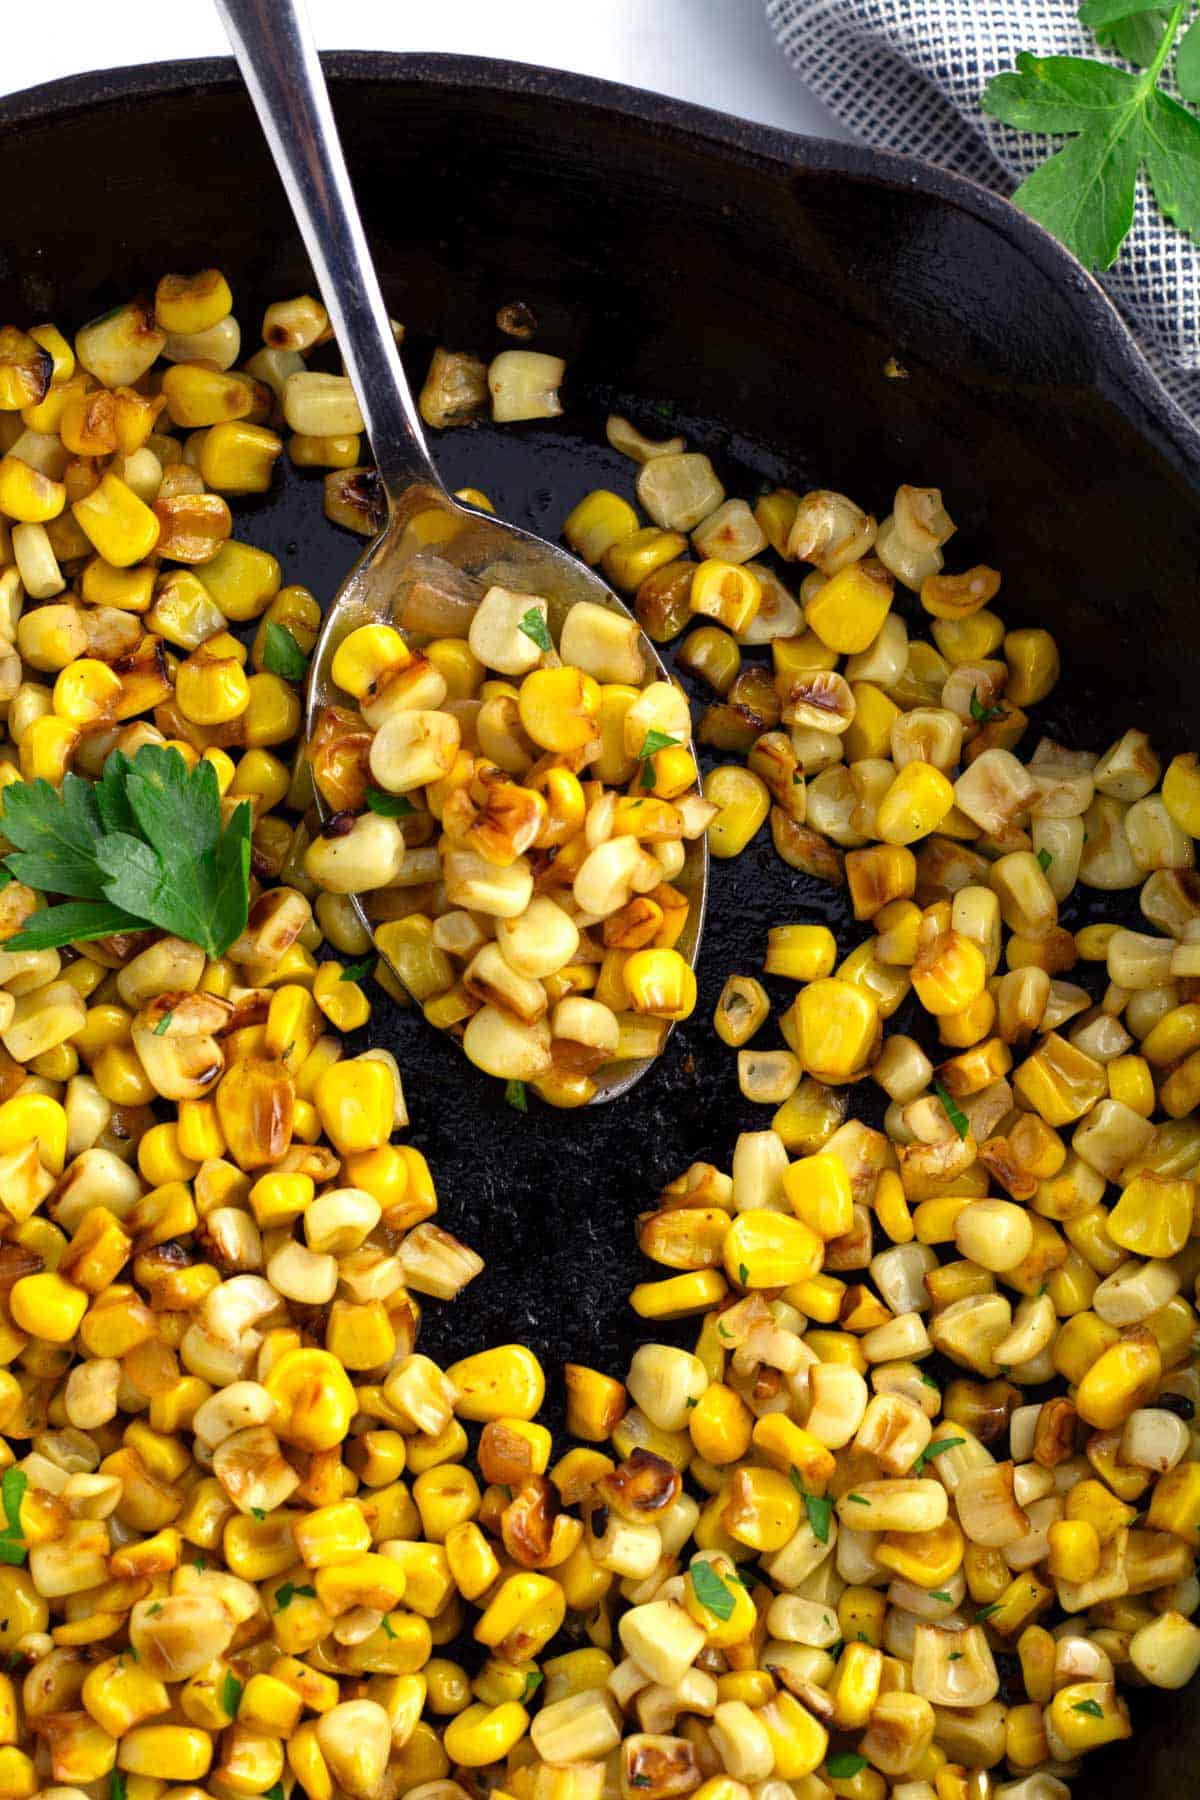 Skillet full of roasted corn with serving spoon.